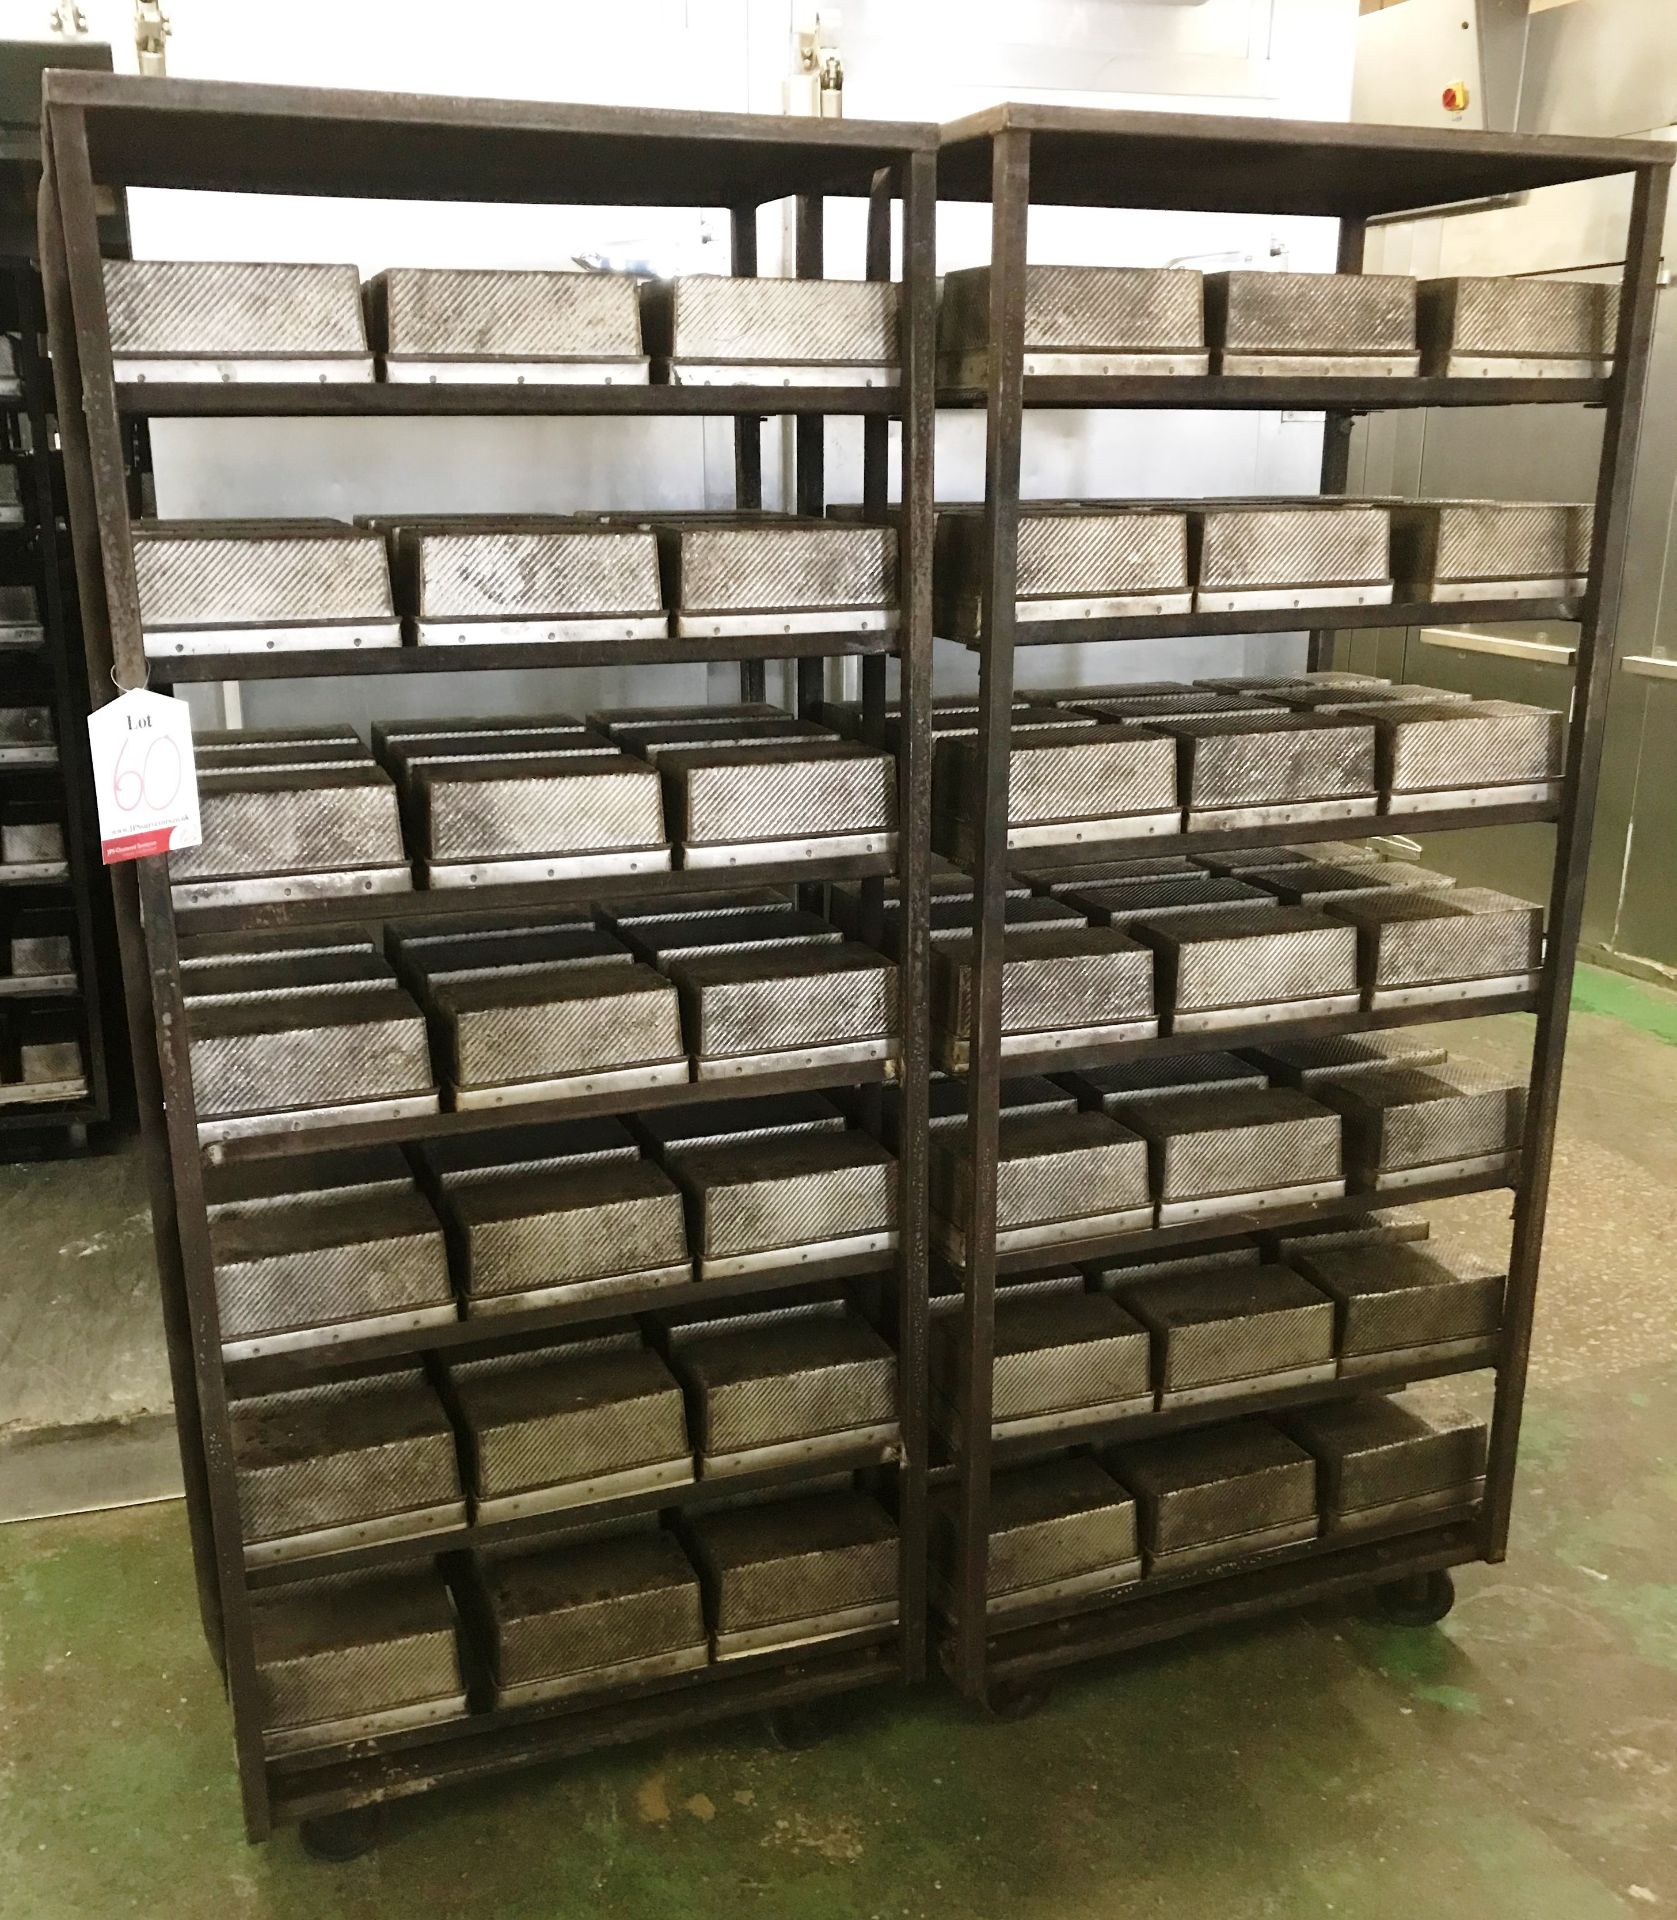 16 x 7 Level Bakery Racks w/ 3 Loaf Baking Tins - Approx 300+ Tins